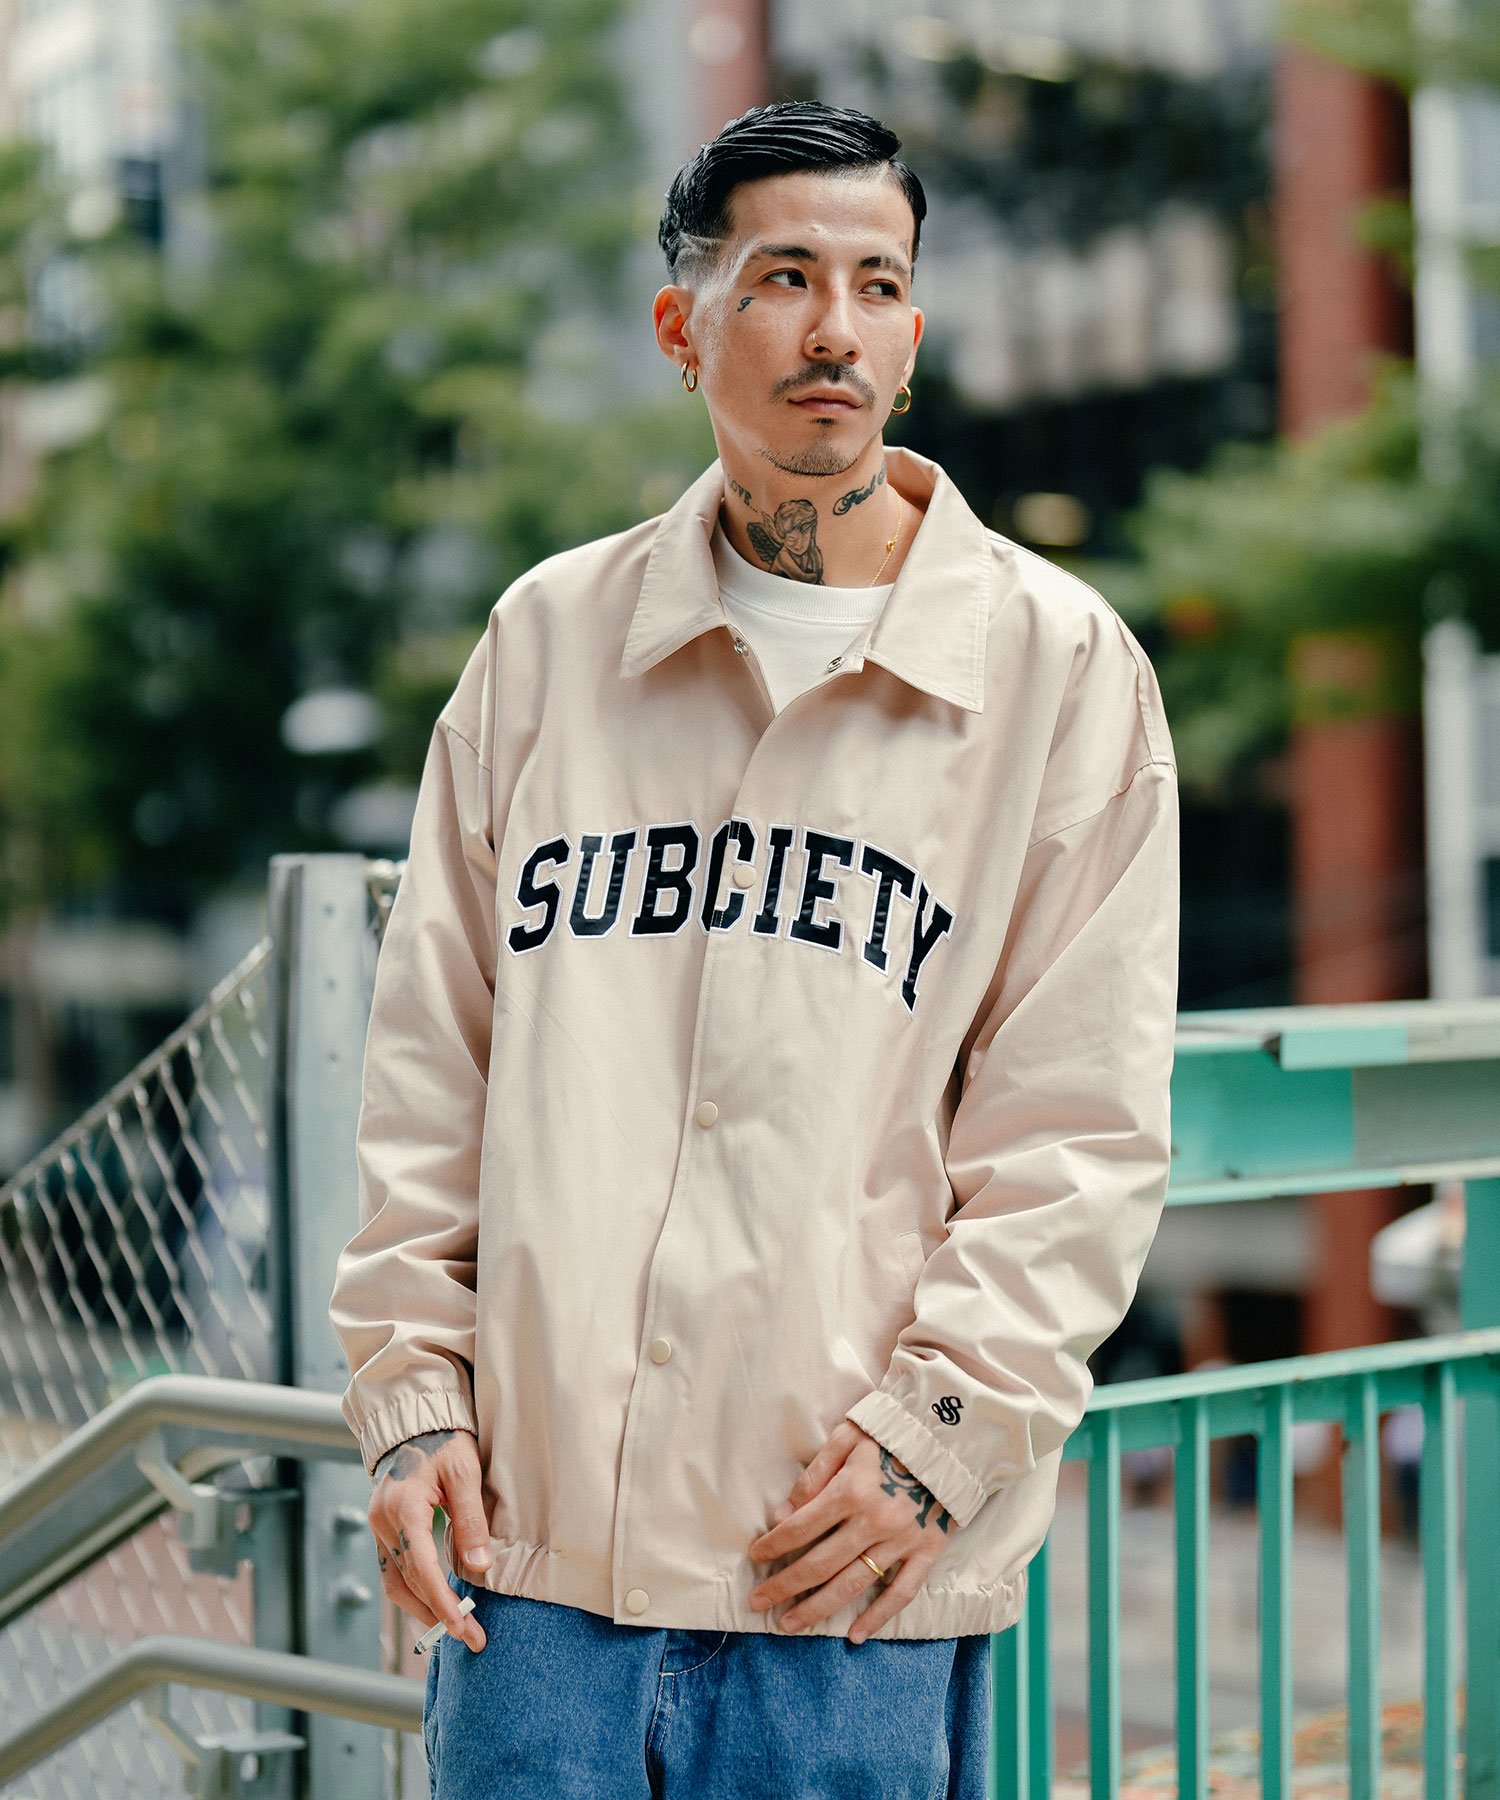 COACH SWING TOP - Subciety Online Store